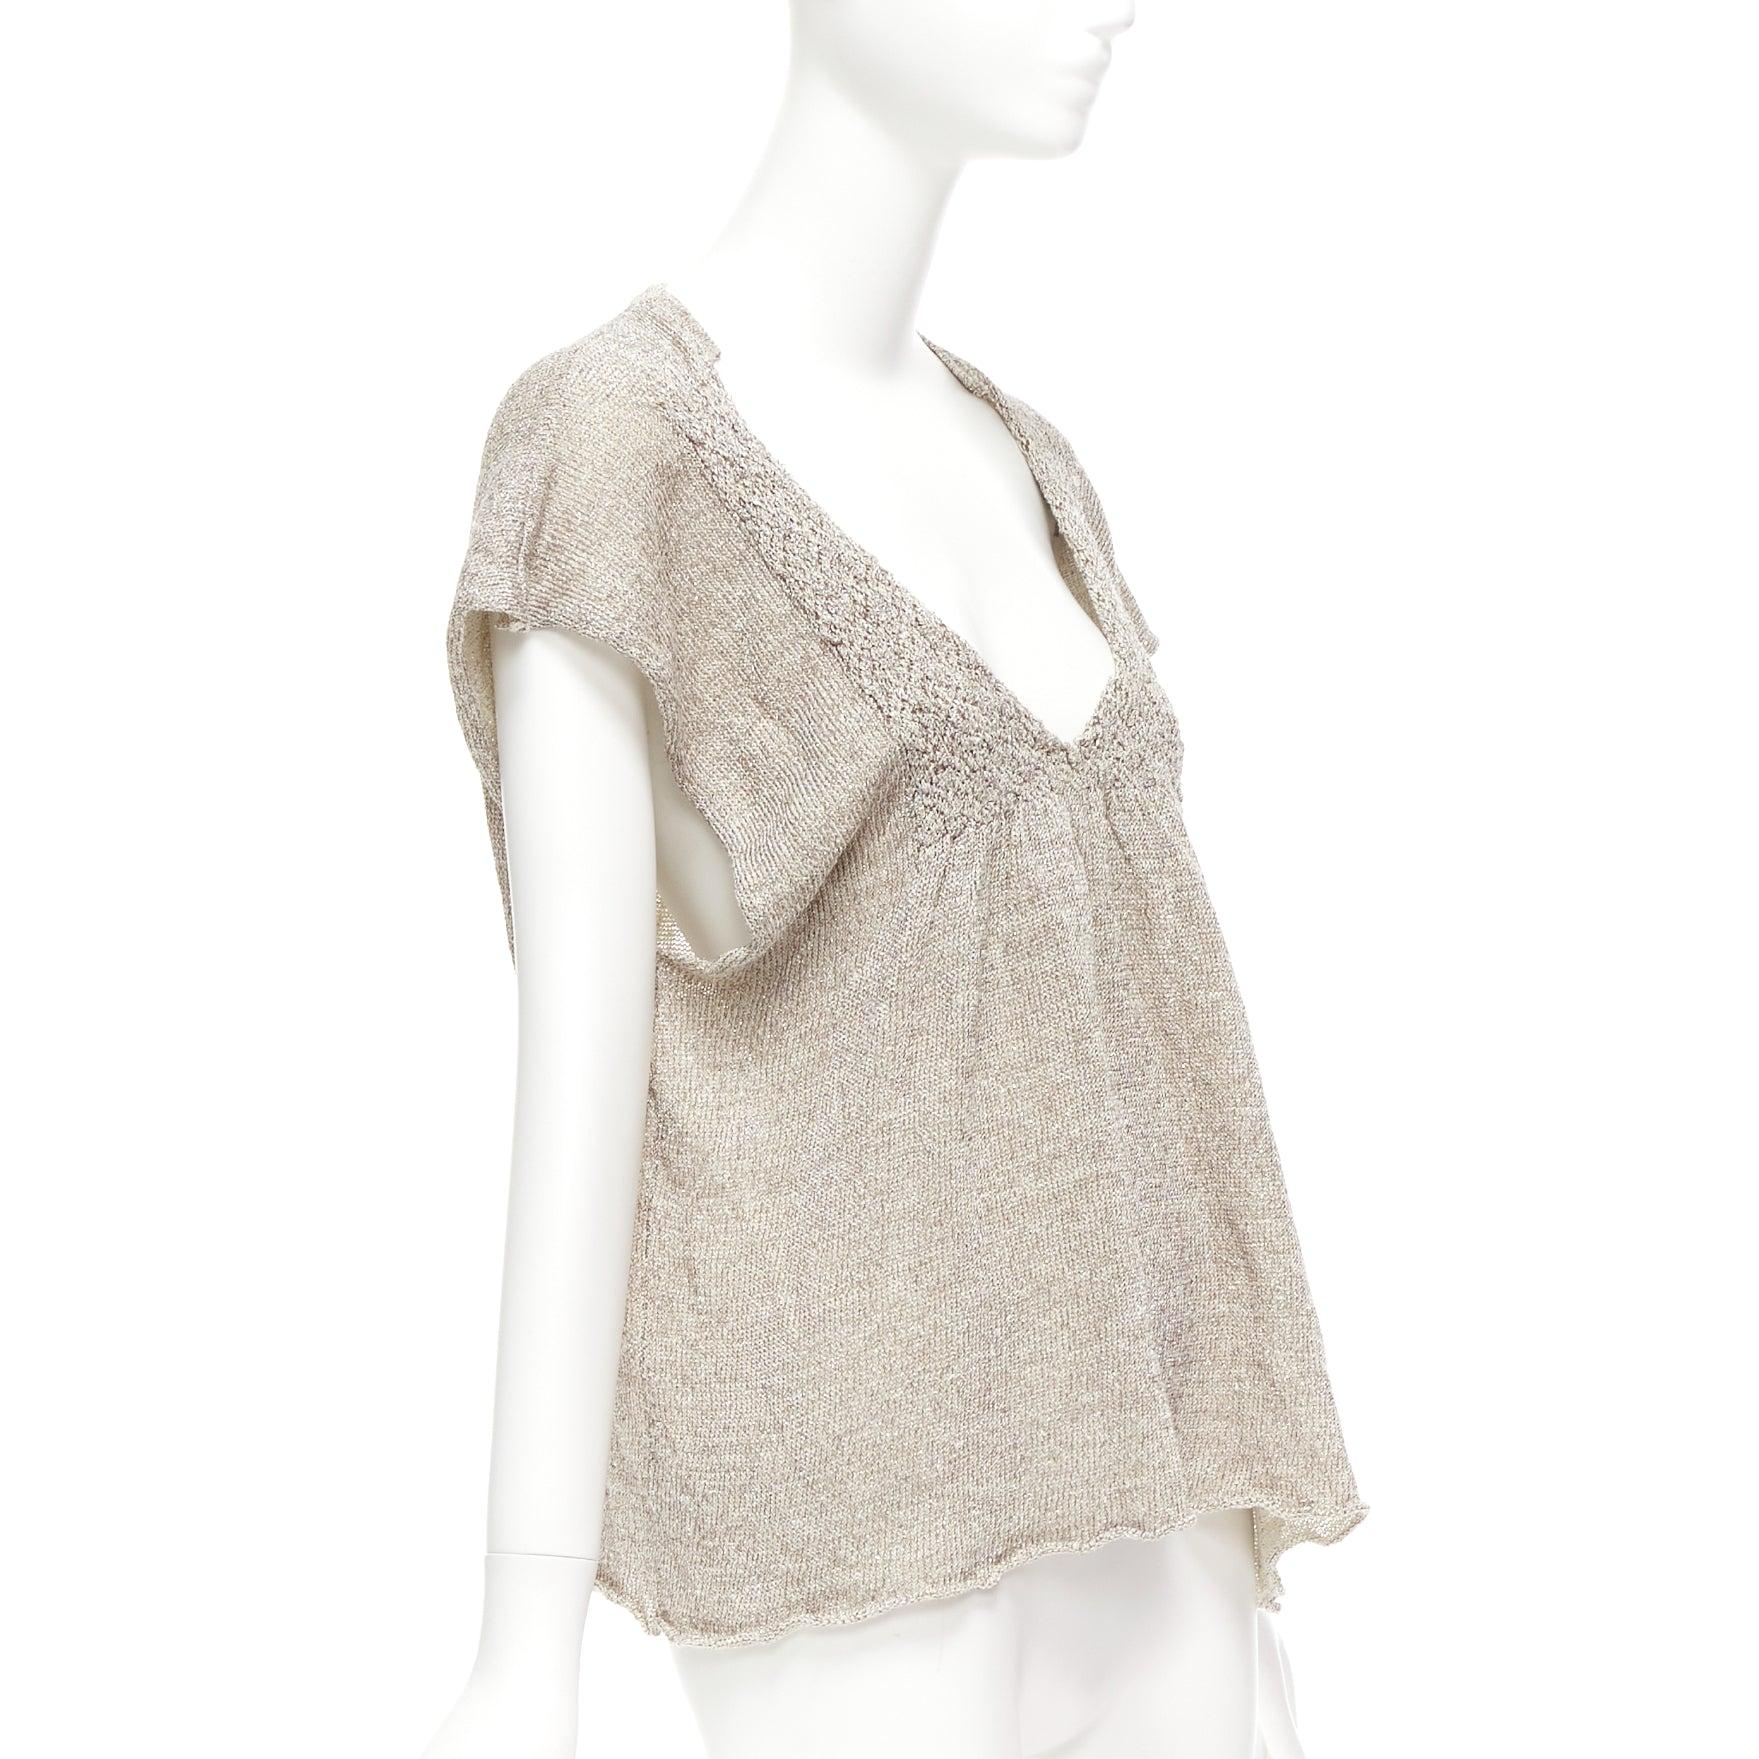 DRIES VAN NOTEN silver linen blend lurex open neck knitted top M
Reference: CELG/A00348
Brand: Dries Van Noten
Material: Linen, Blend
Color: Silver
Pattern: Solid
Closure: Slip On
Made in: Belgium

CONDITION:
Condition: Excellent, this item was